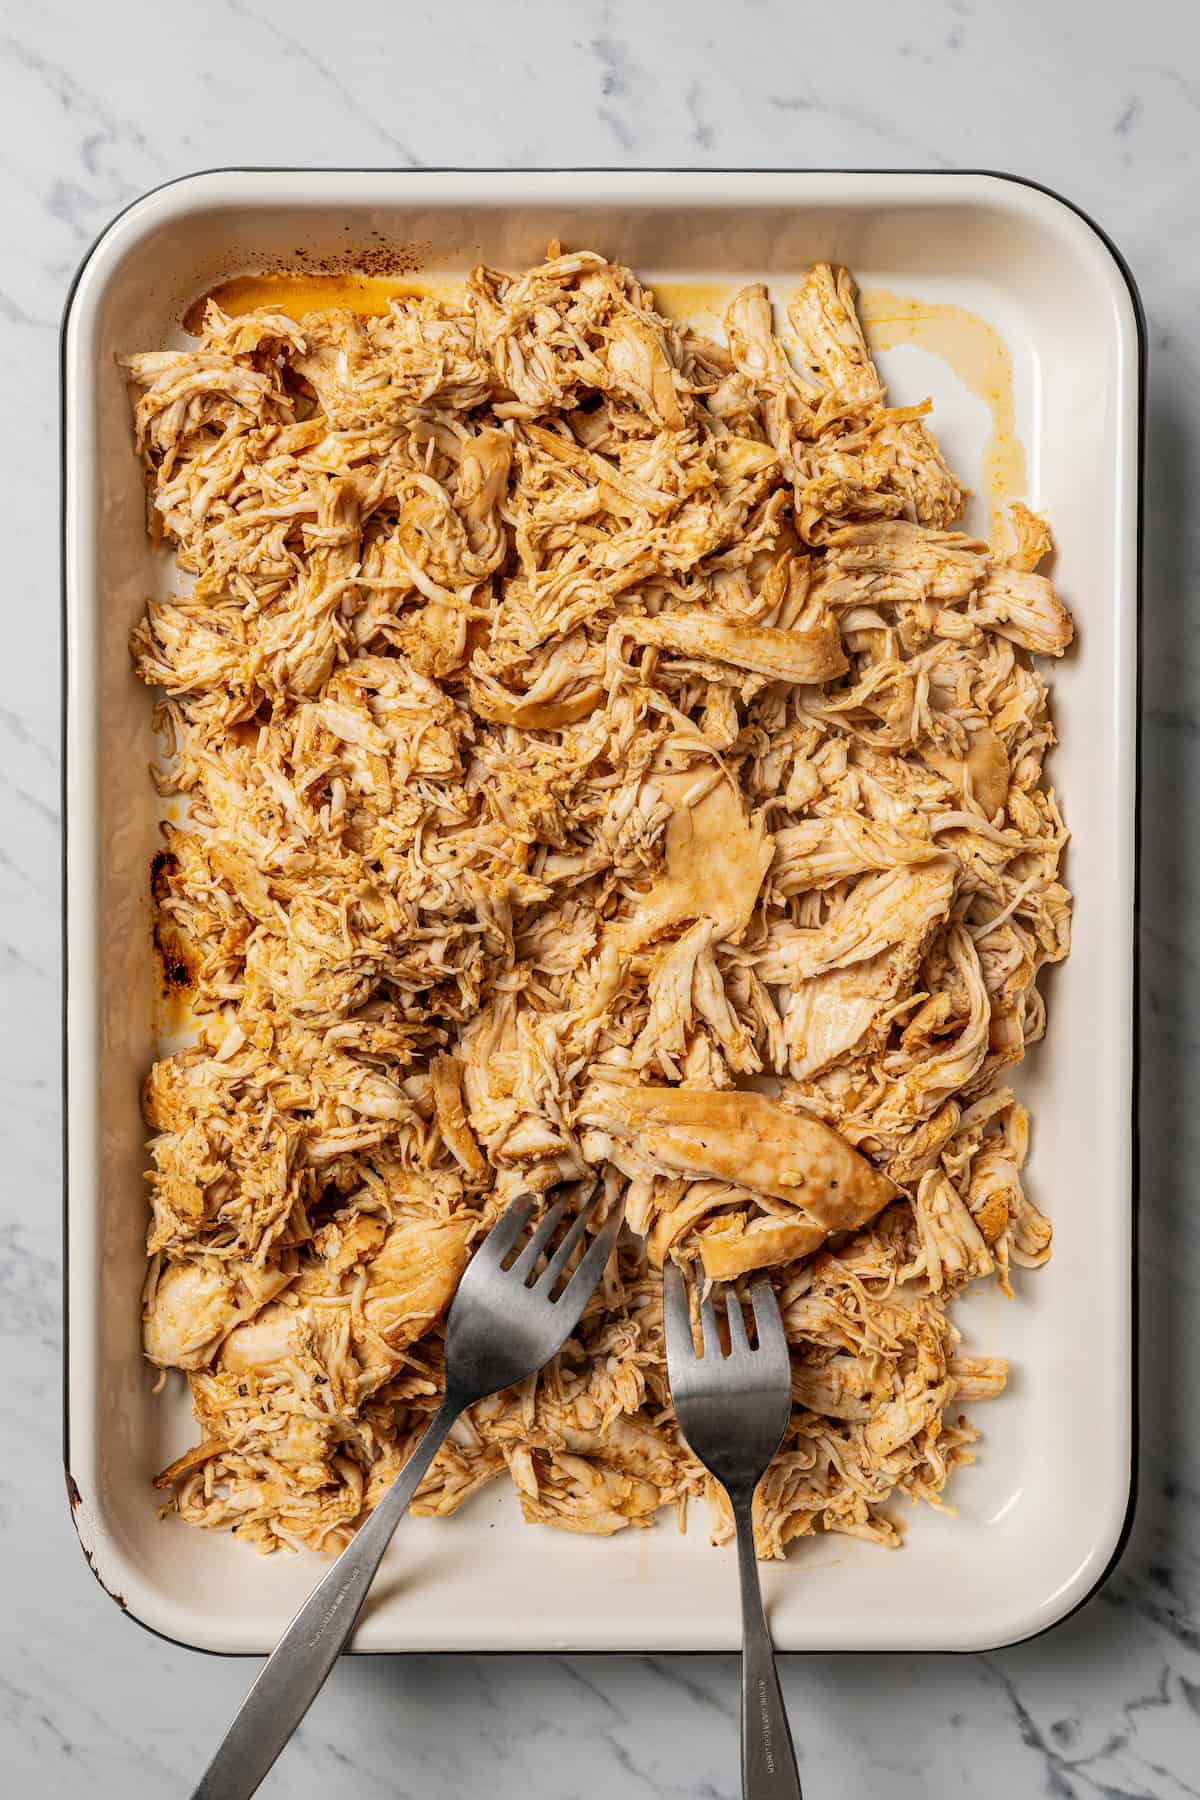 Shredded chicken in a rimmed baking tray with two forks.